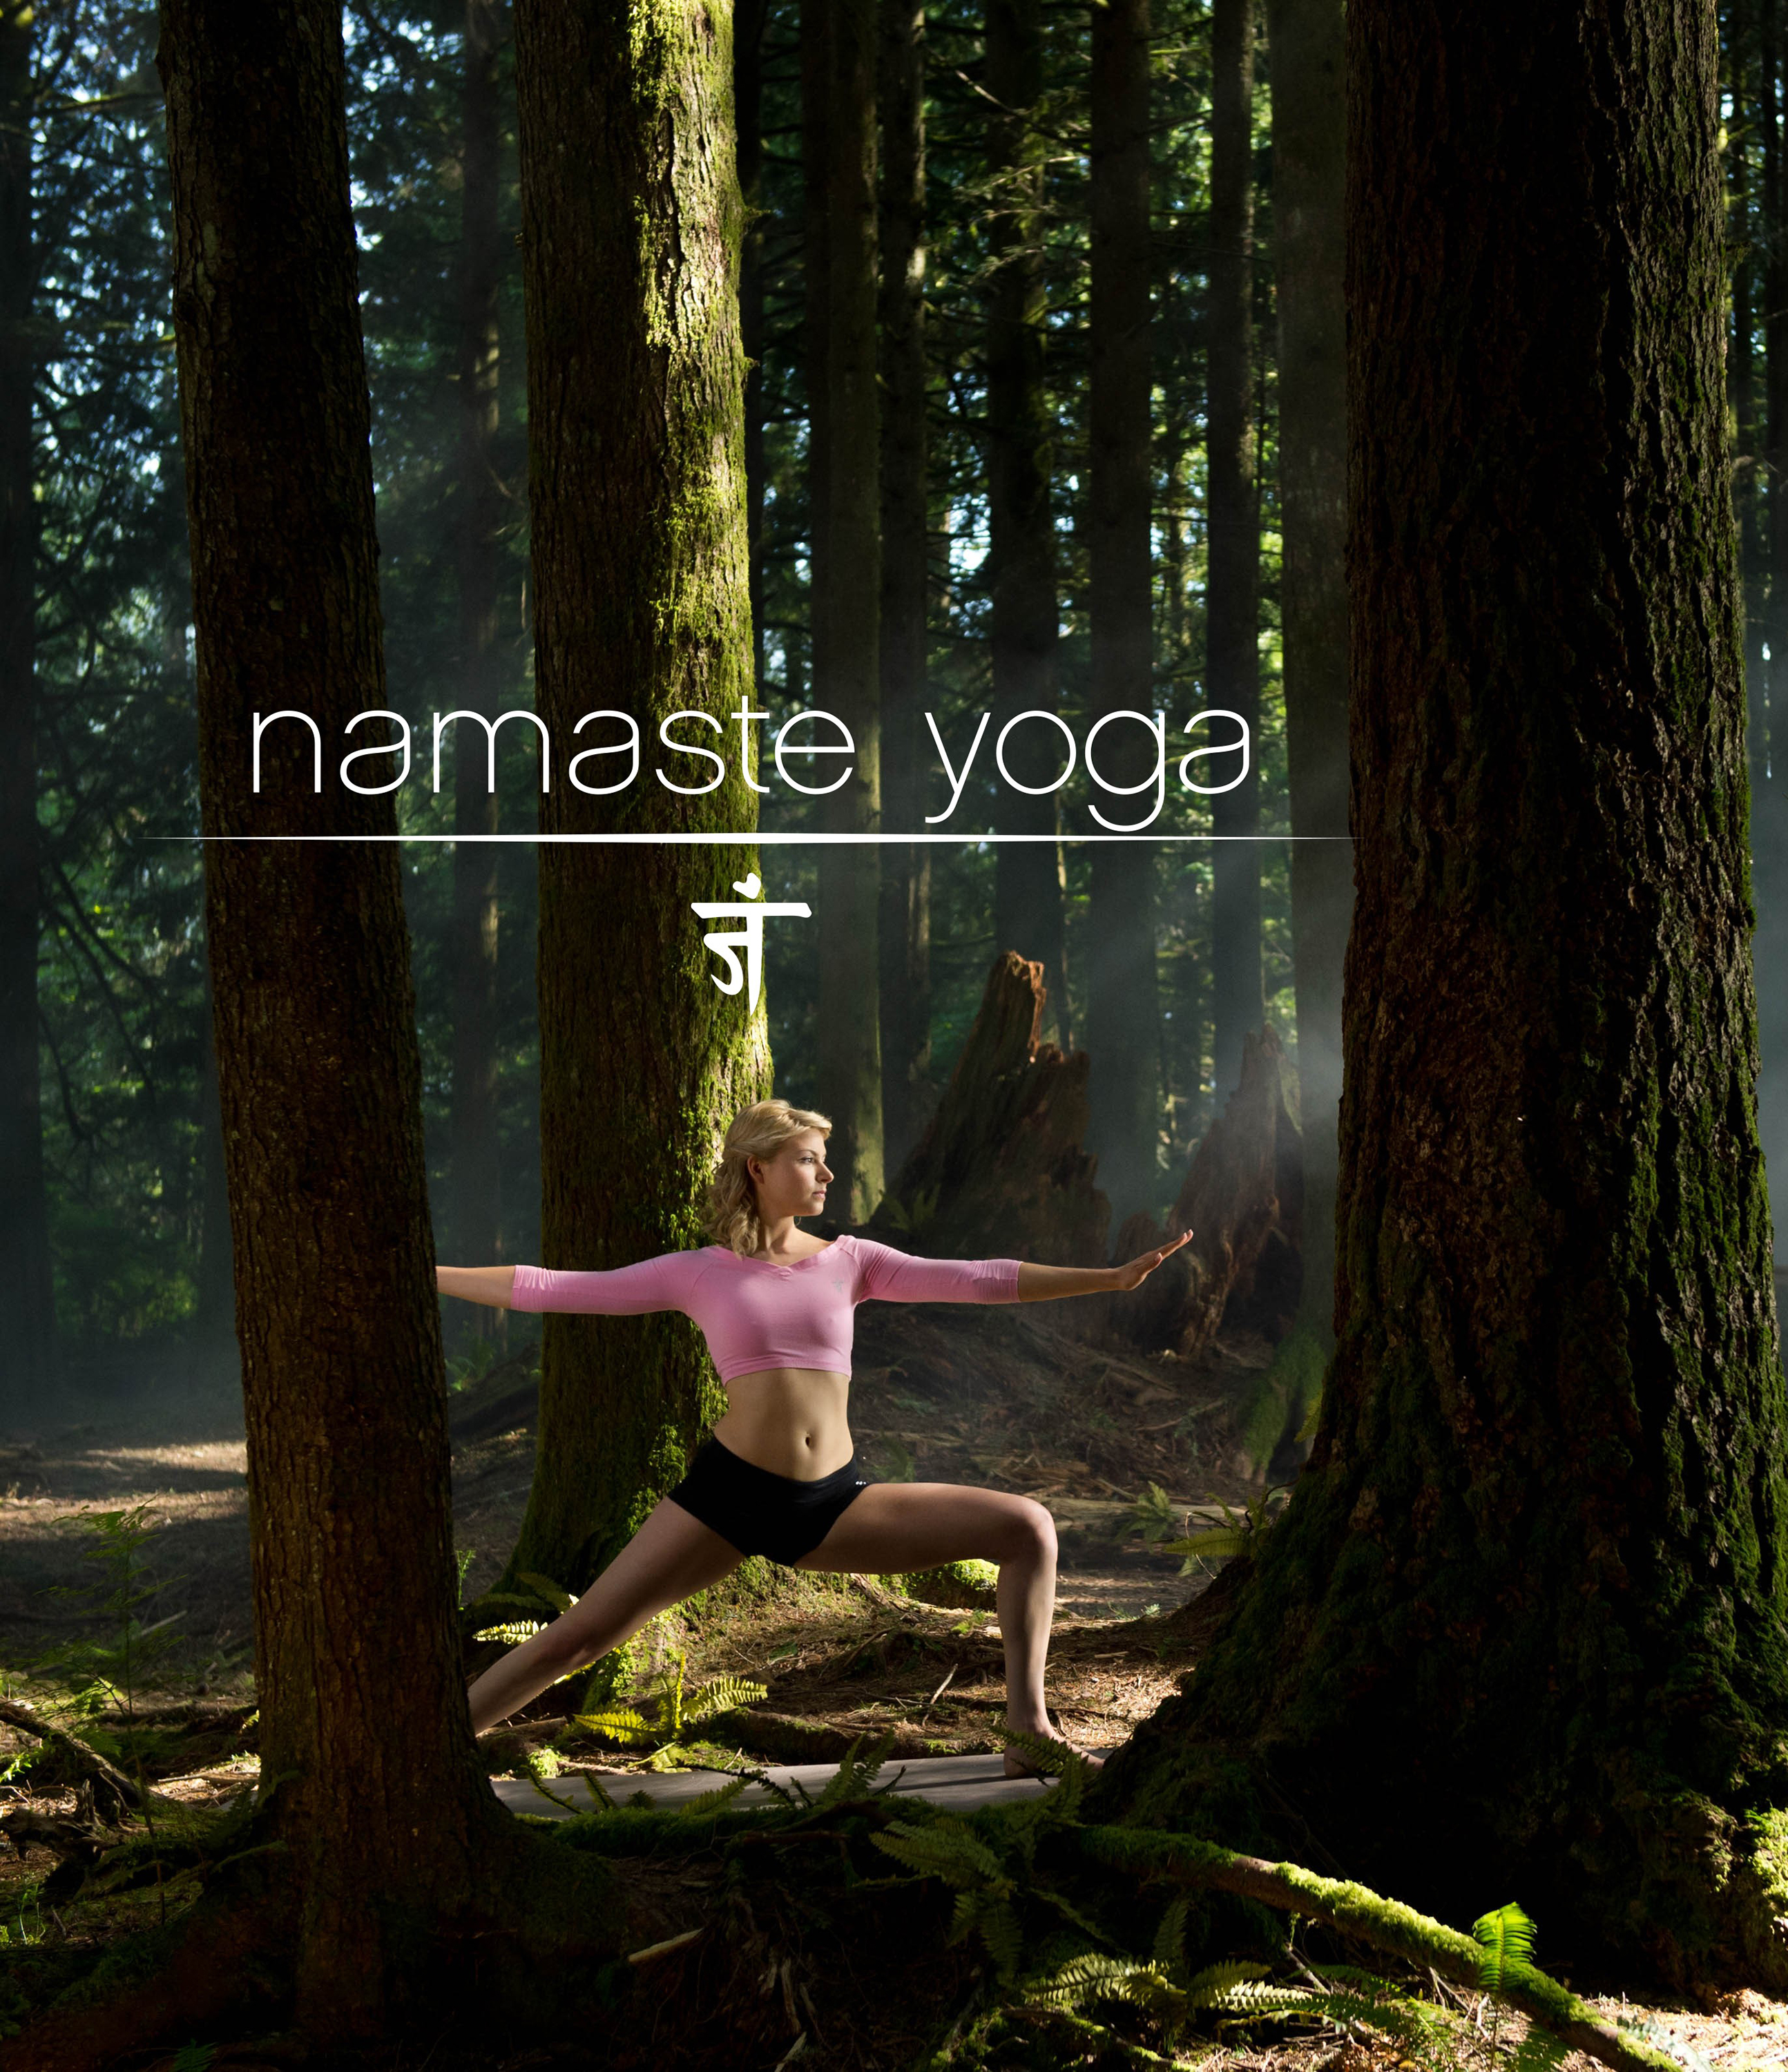 adang sumpena recommends Namaste Yoga Cast